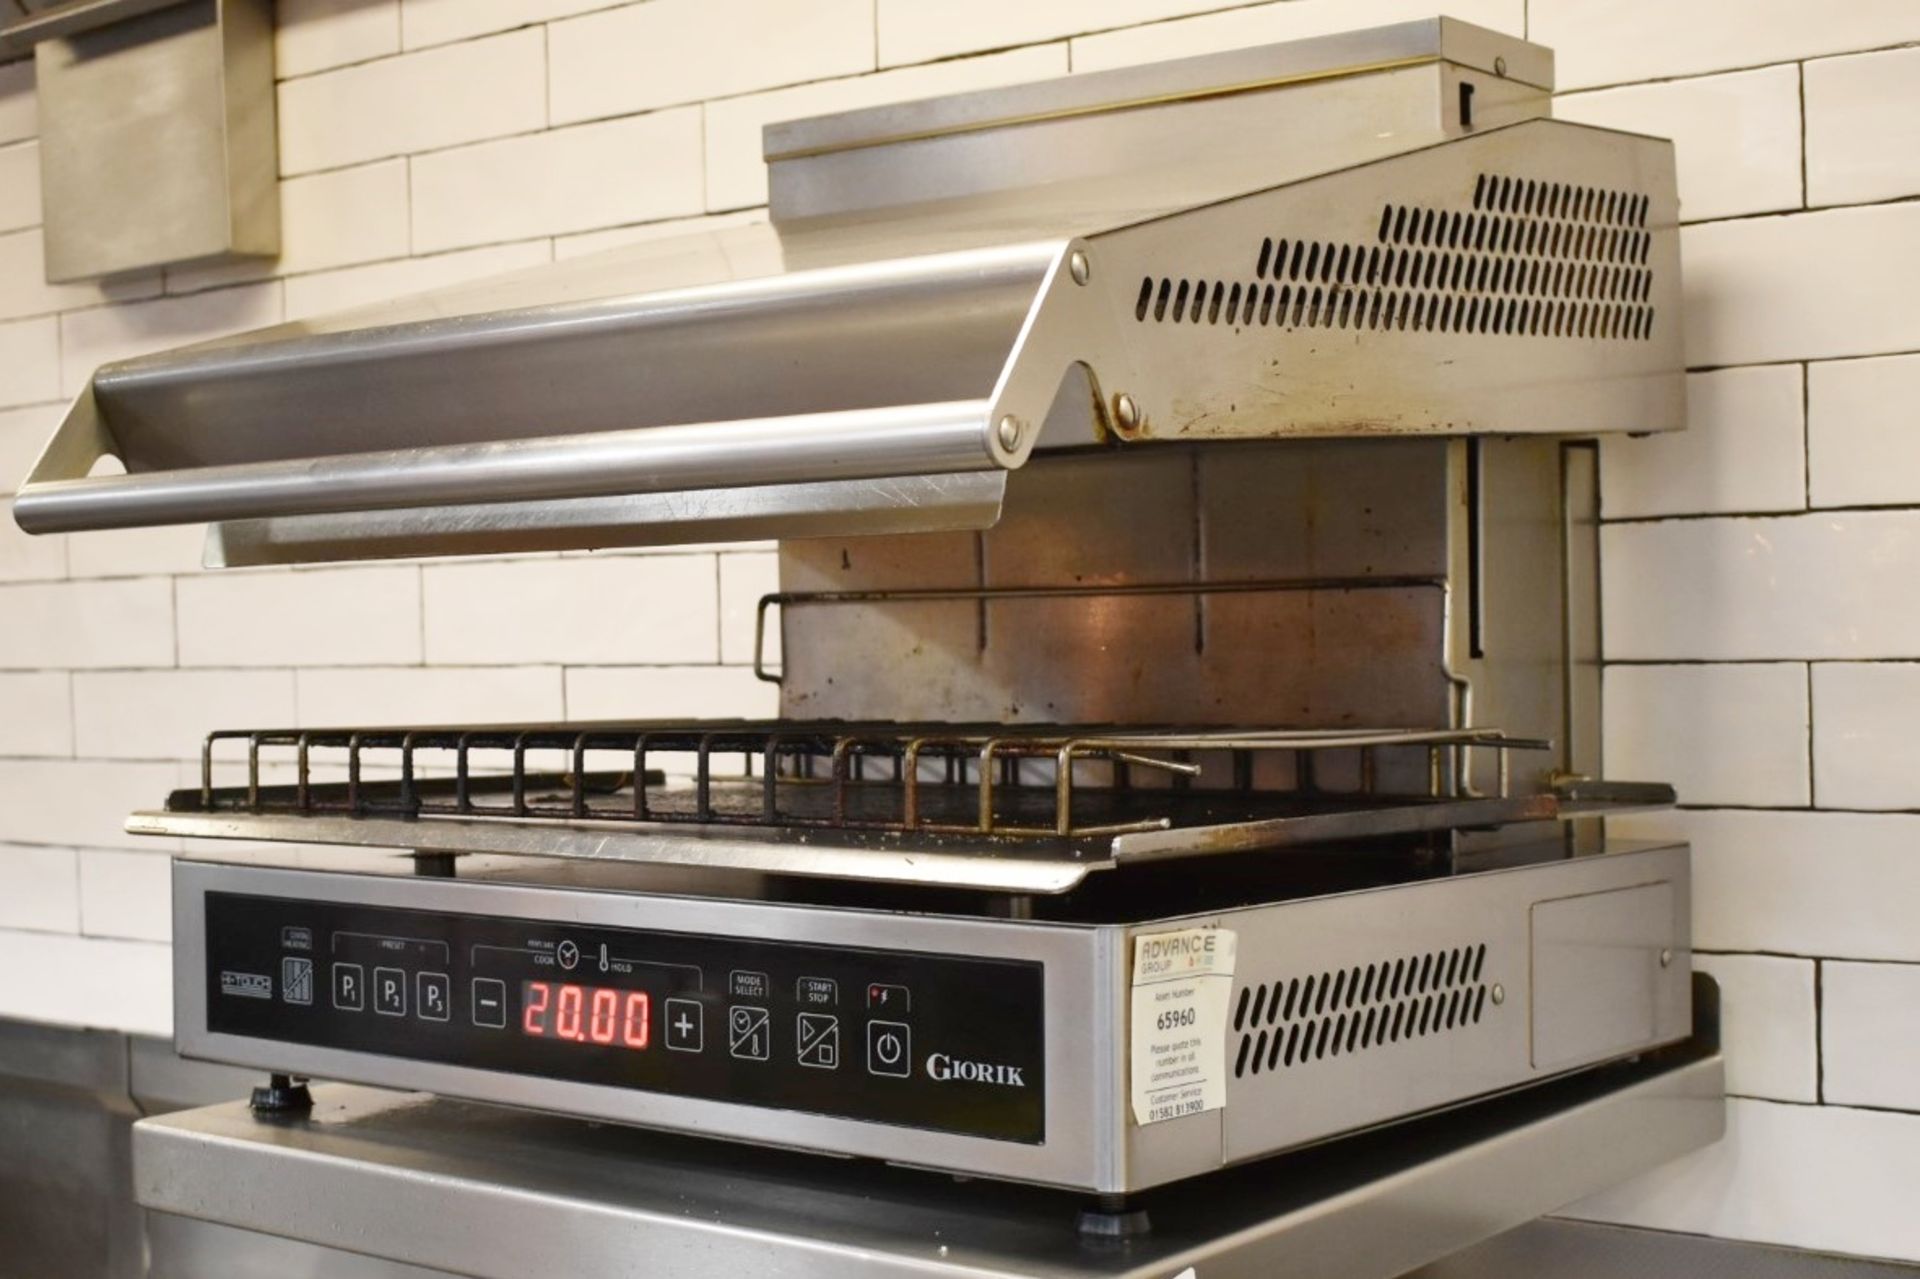 1 x Giorik Hi Touch Commercial Salamanda Grill With Stainless Steel Finish - Includes Wall Mounted